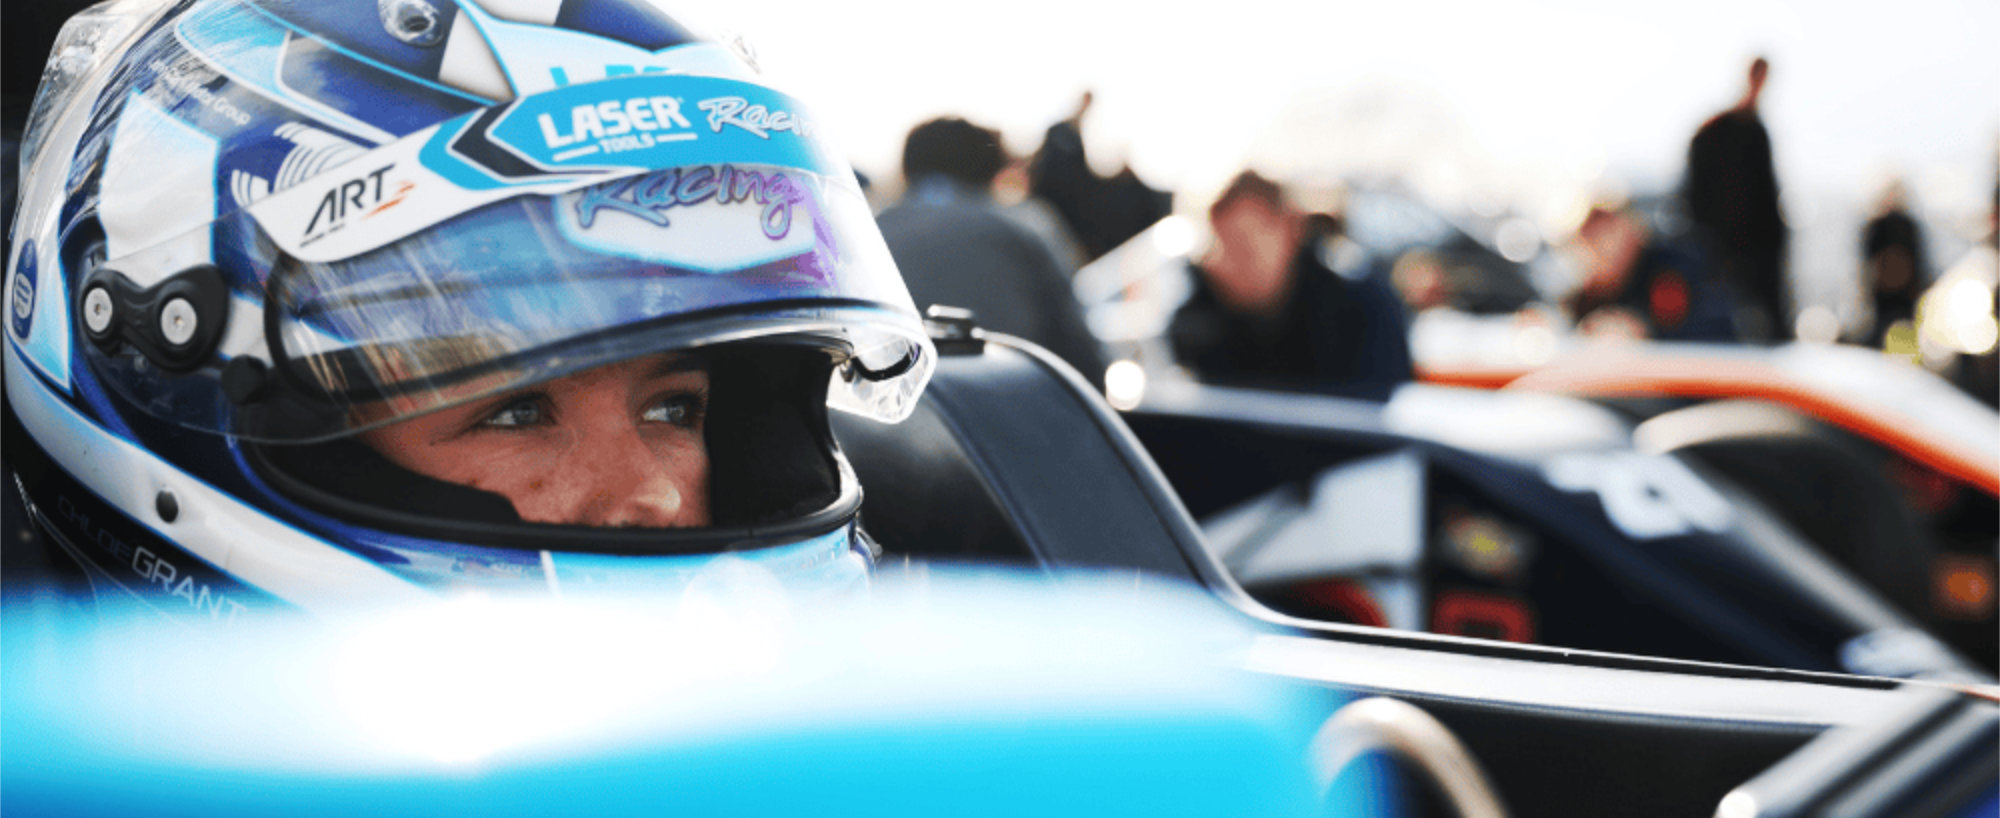 Chloe Grant in her car, close up shot of wearing helmet with visor open, looking away at camera. Other cars can be seen in the background, suggesting this is the starting grid. 